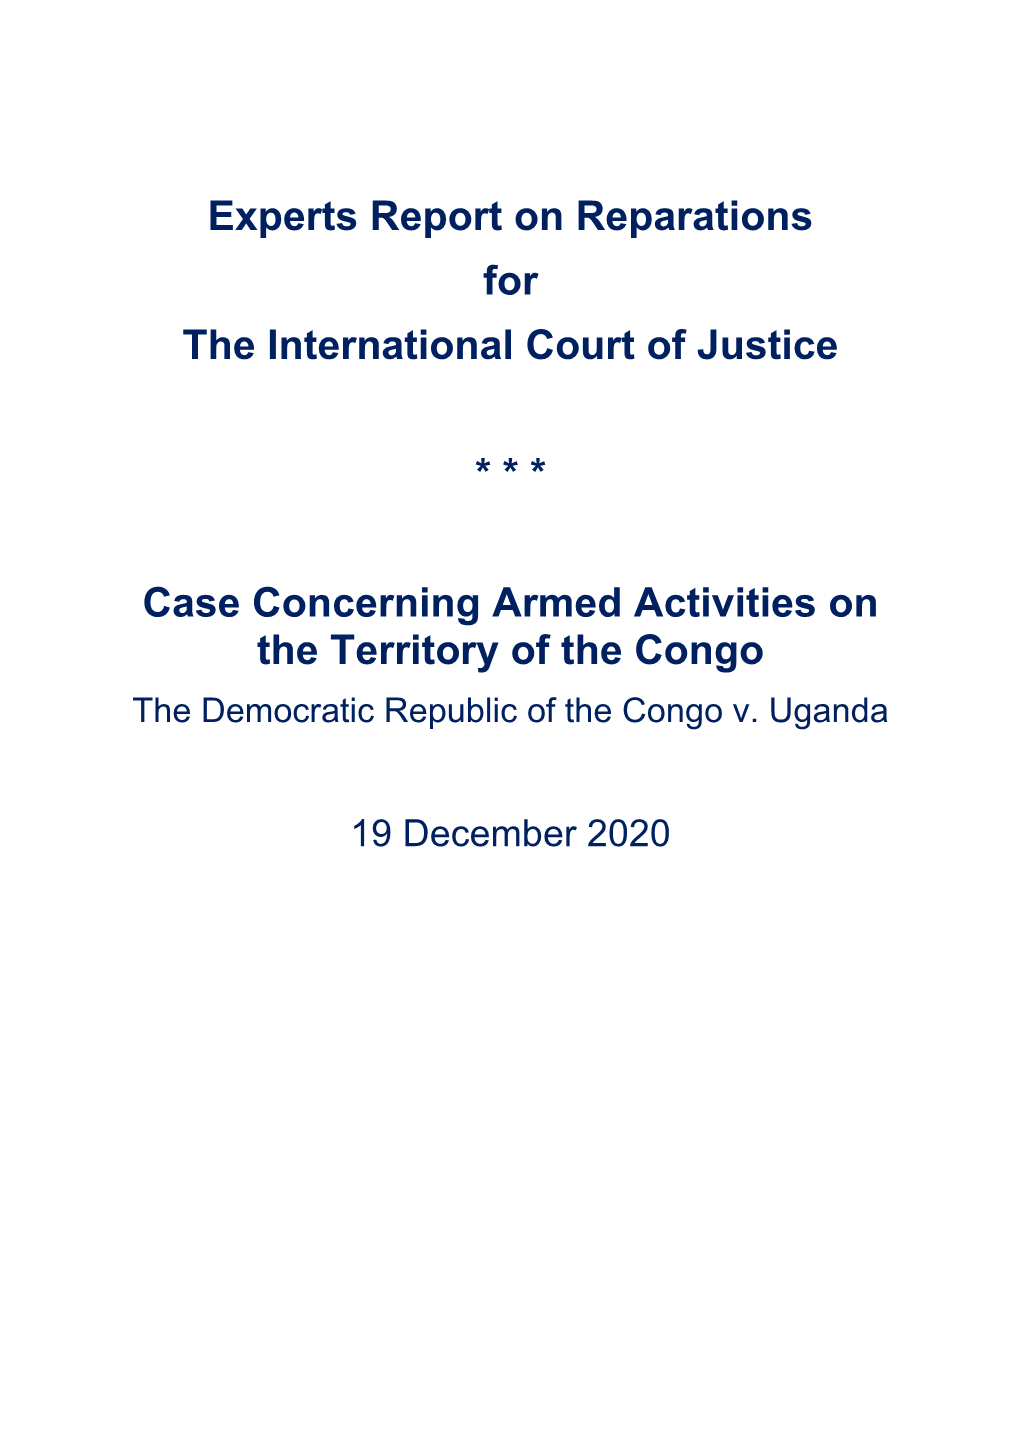 Experts Report on Reparations for the International Court of Justice